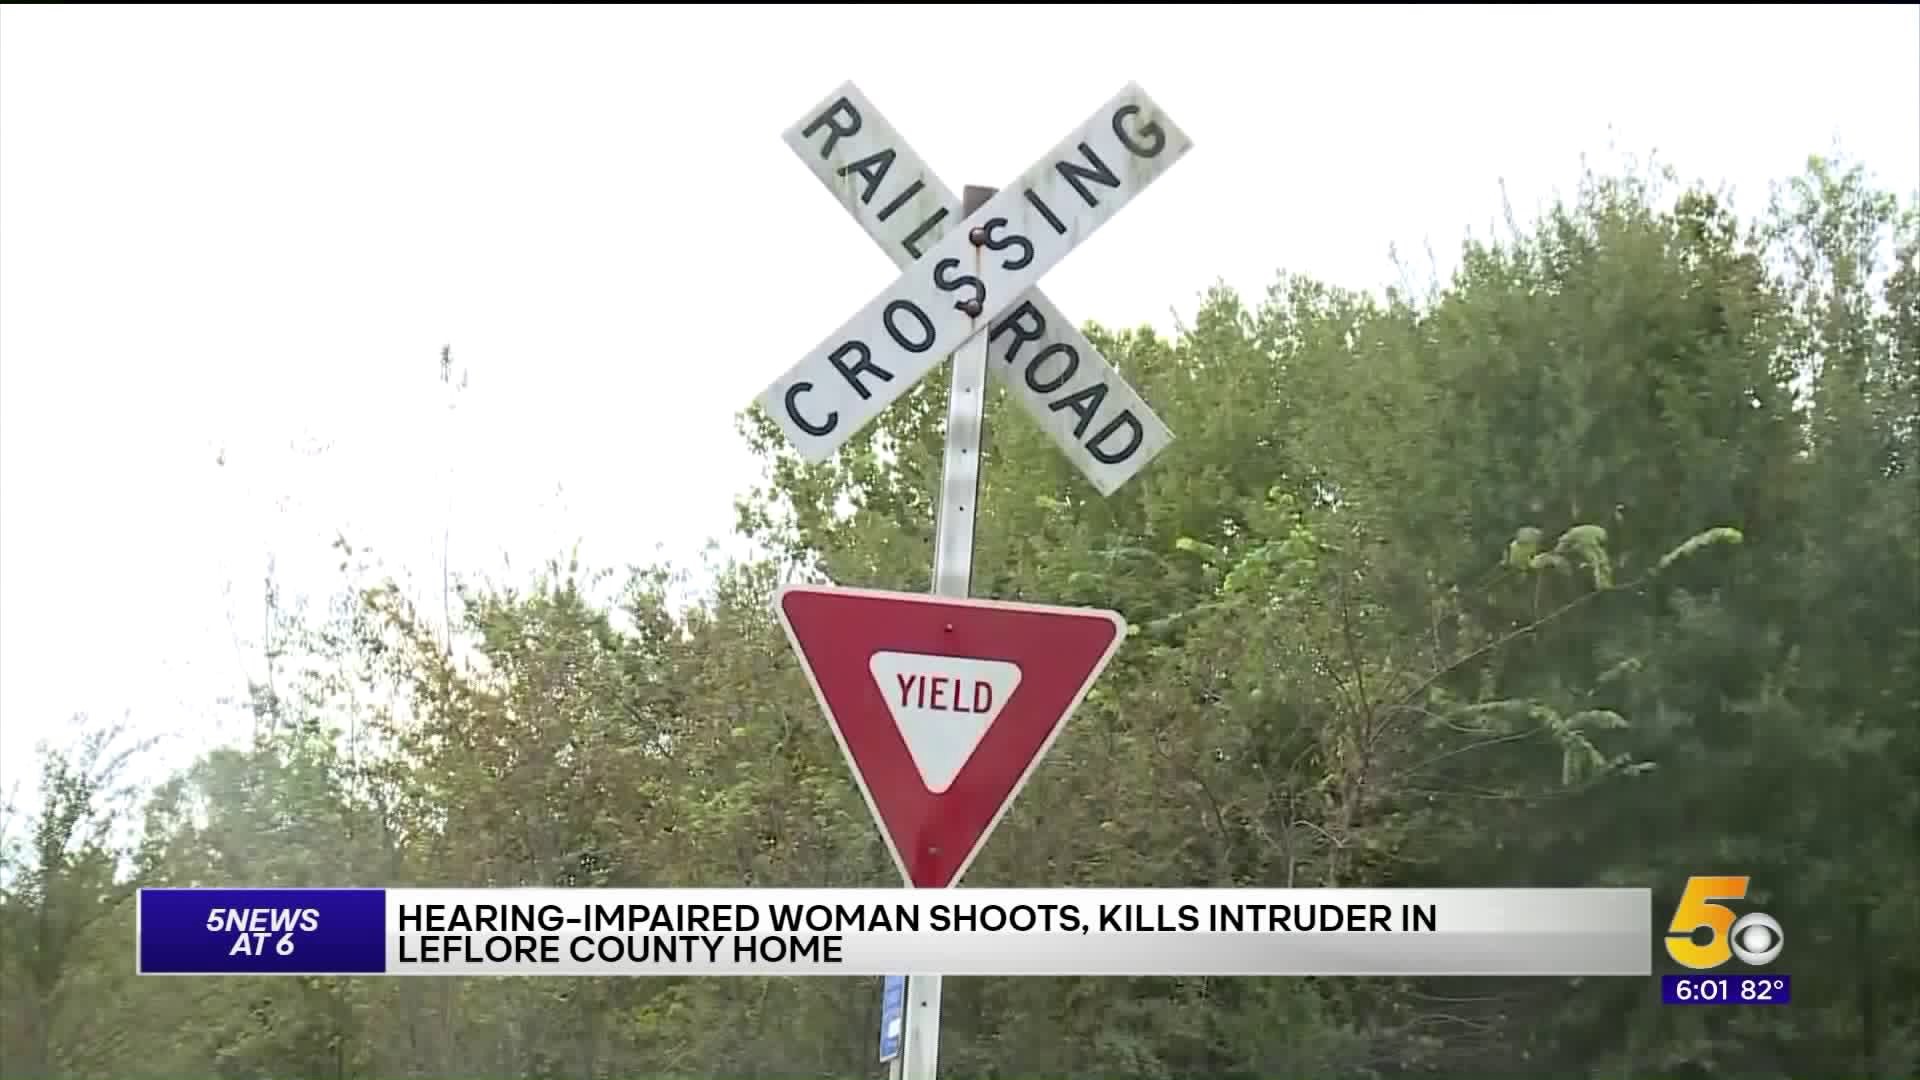 Hearing Impared Woman Shoots and Kills Home Intruder